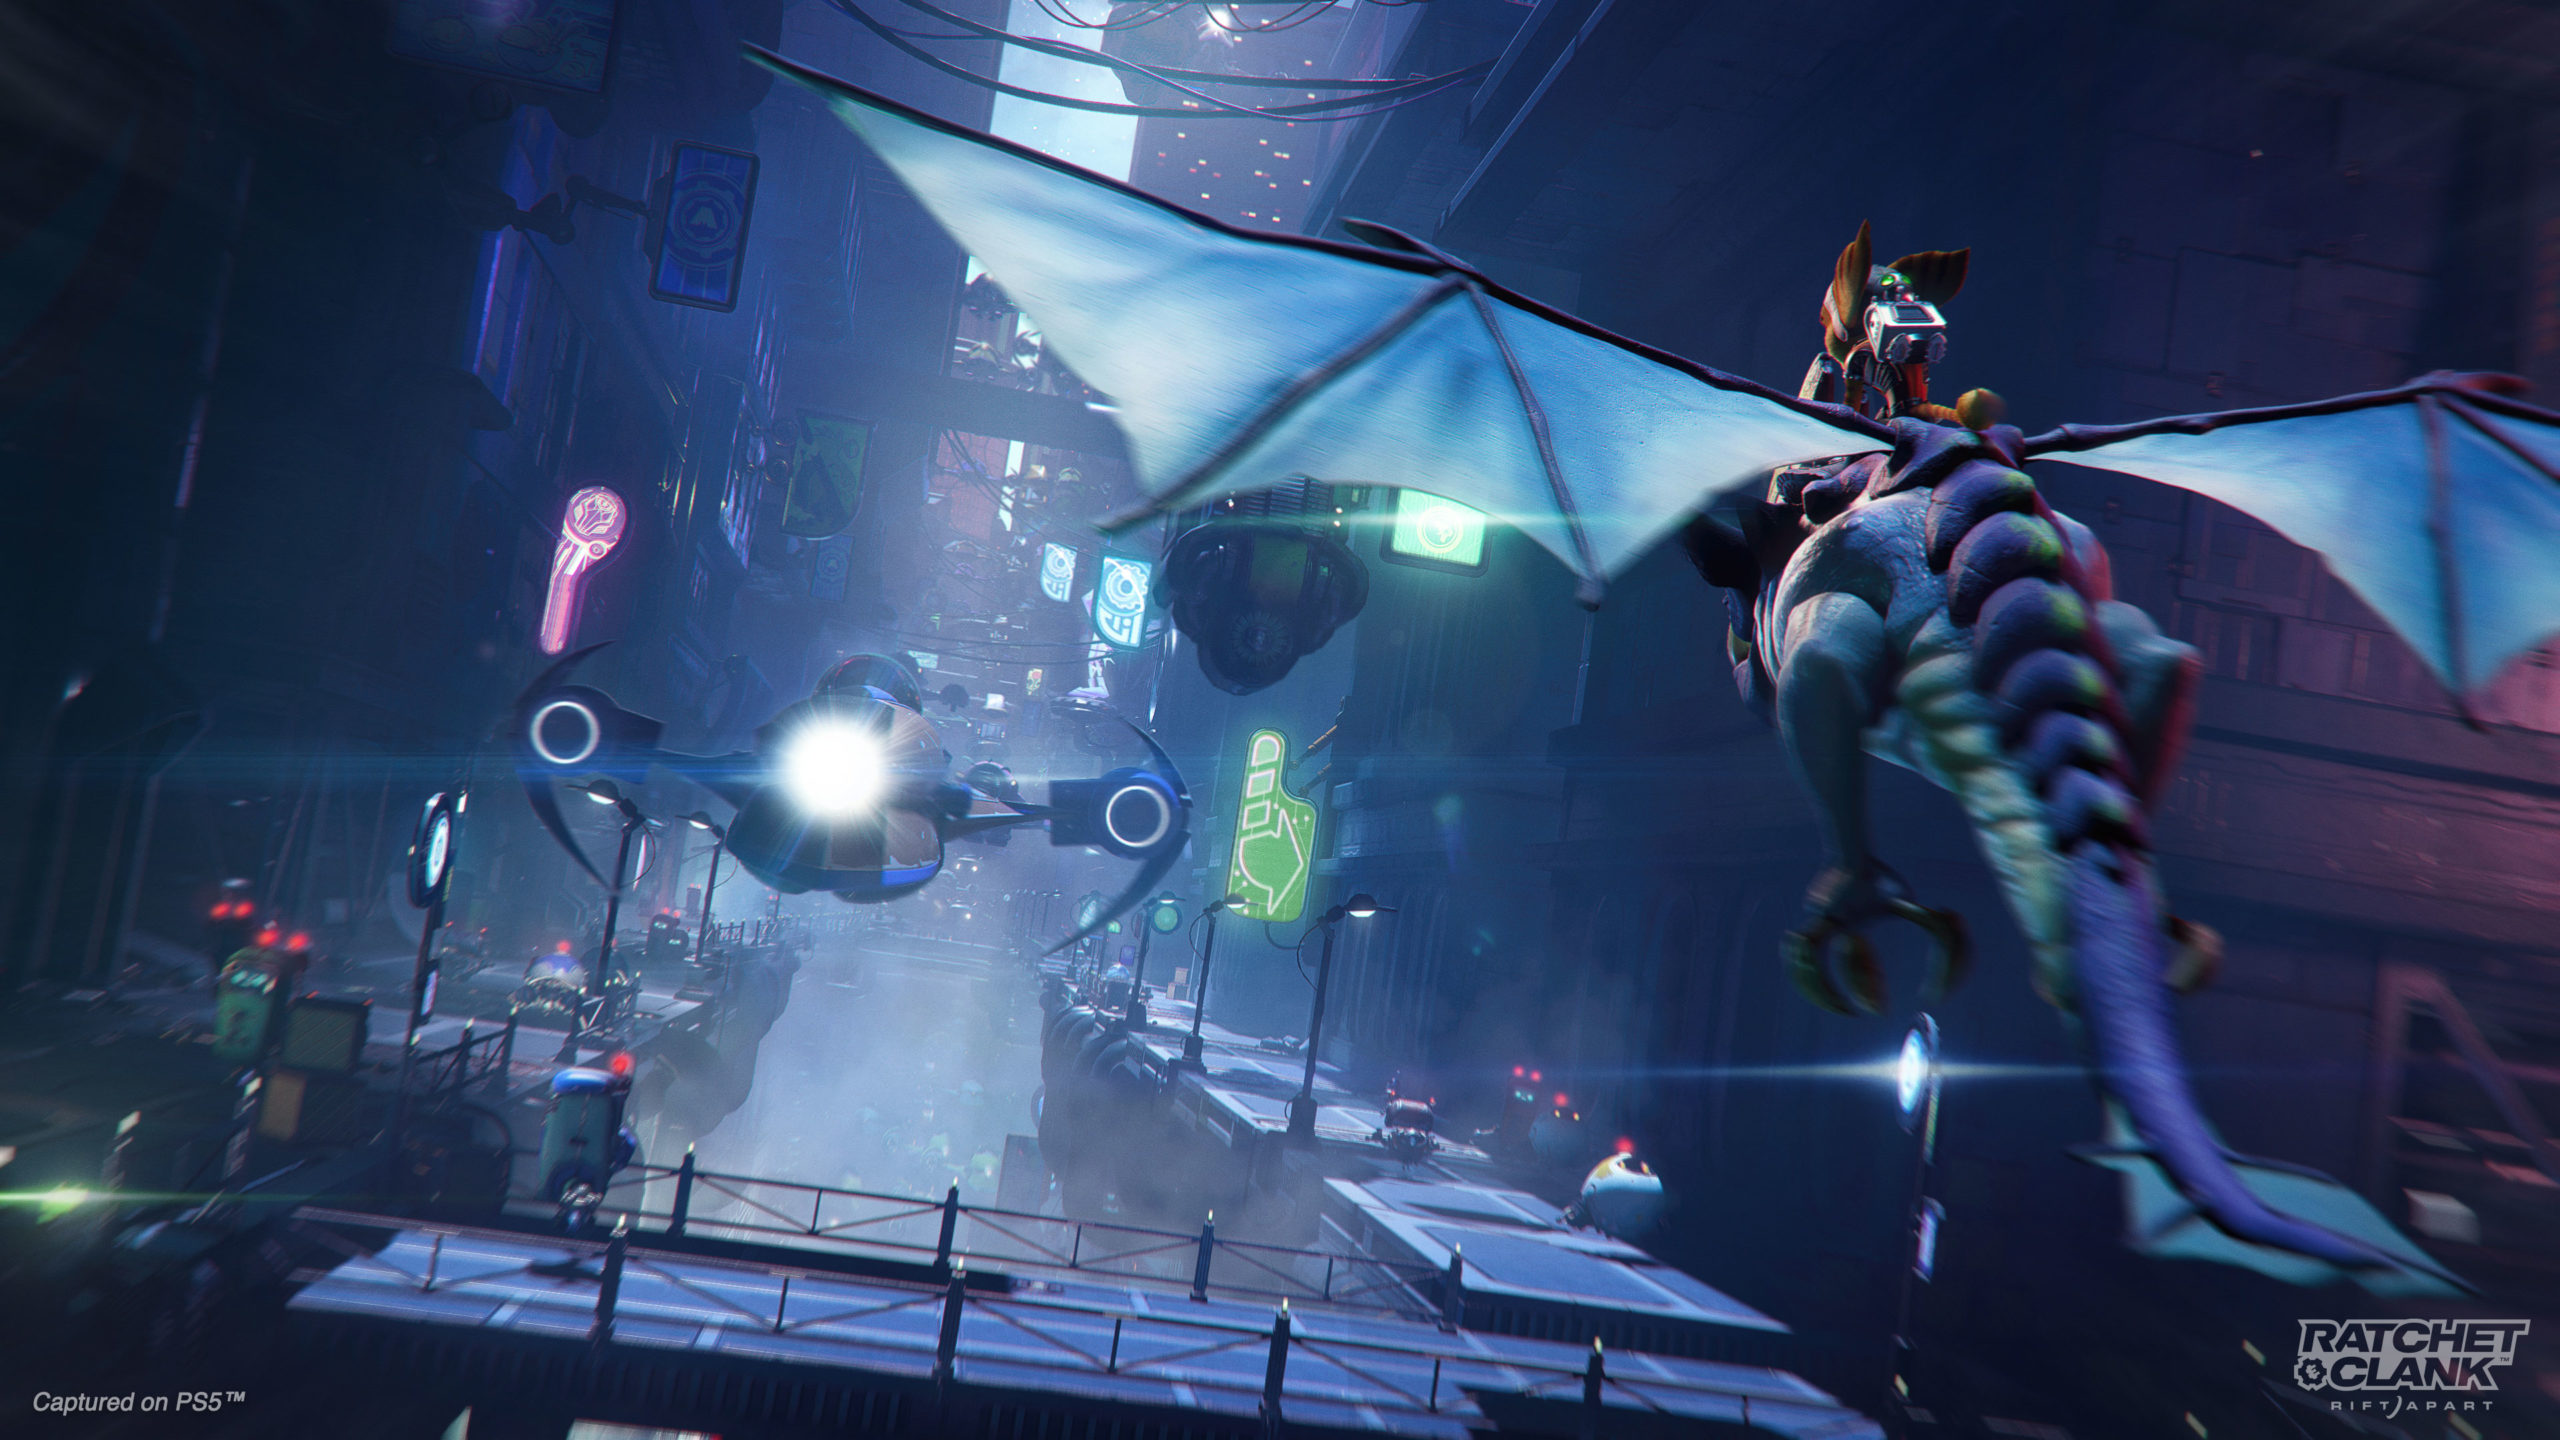 HD desktop wallpaper featuring a scene from Ratchet & Clank: Rift Apart with characters and futuristic cityscape.
